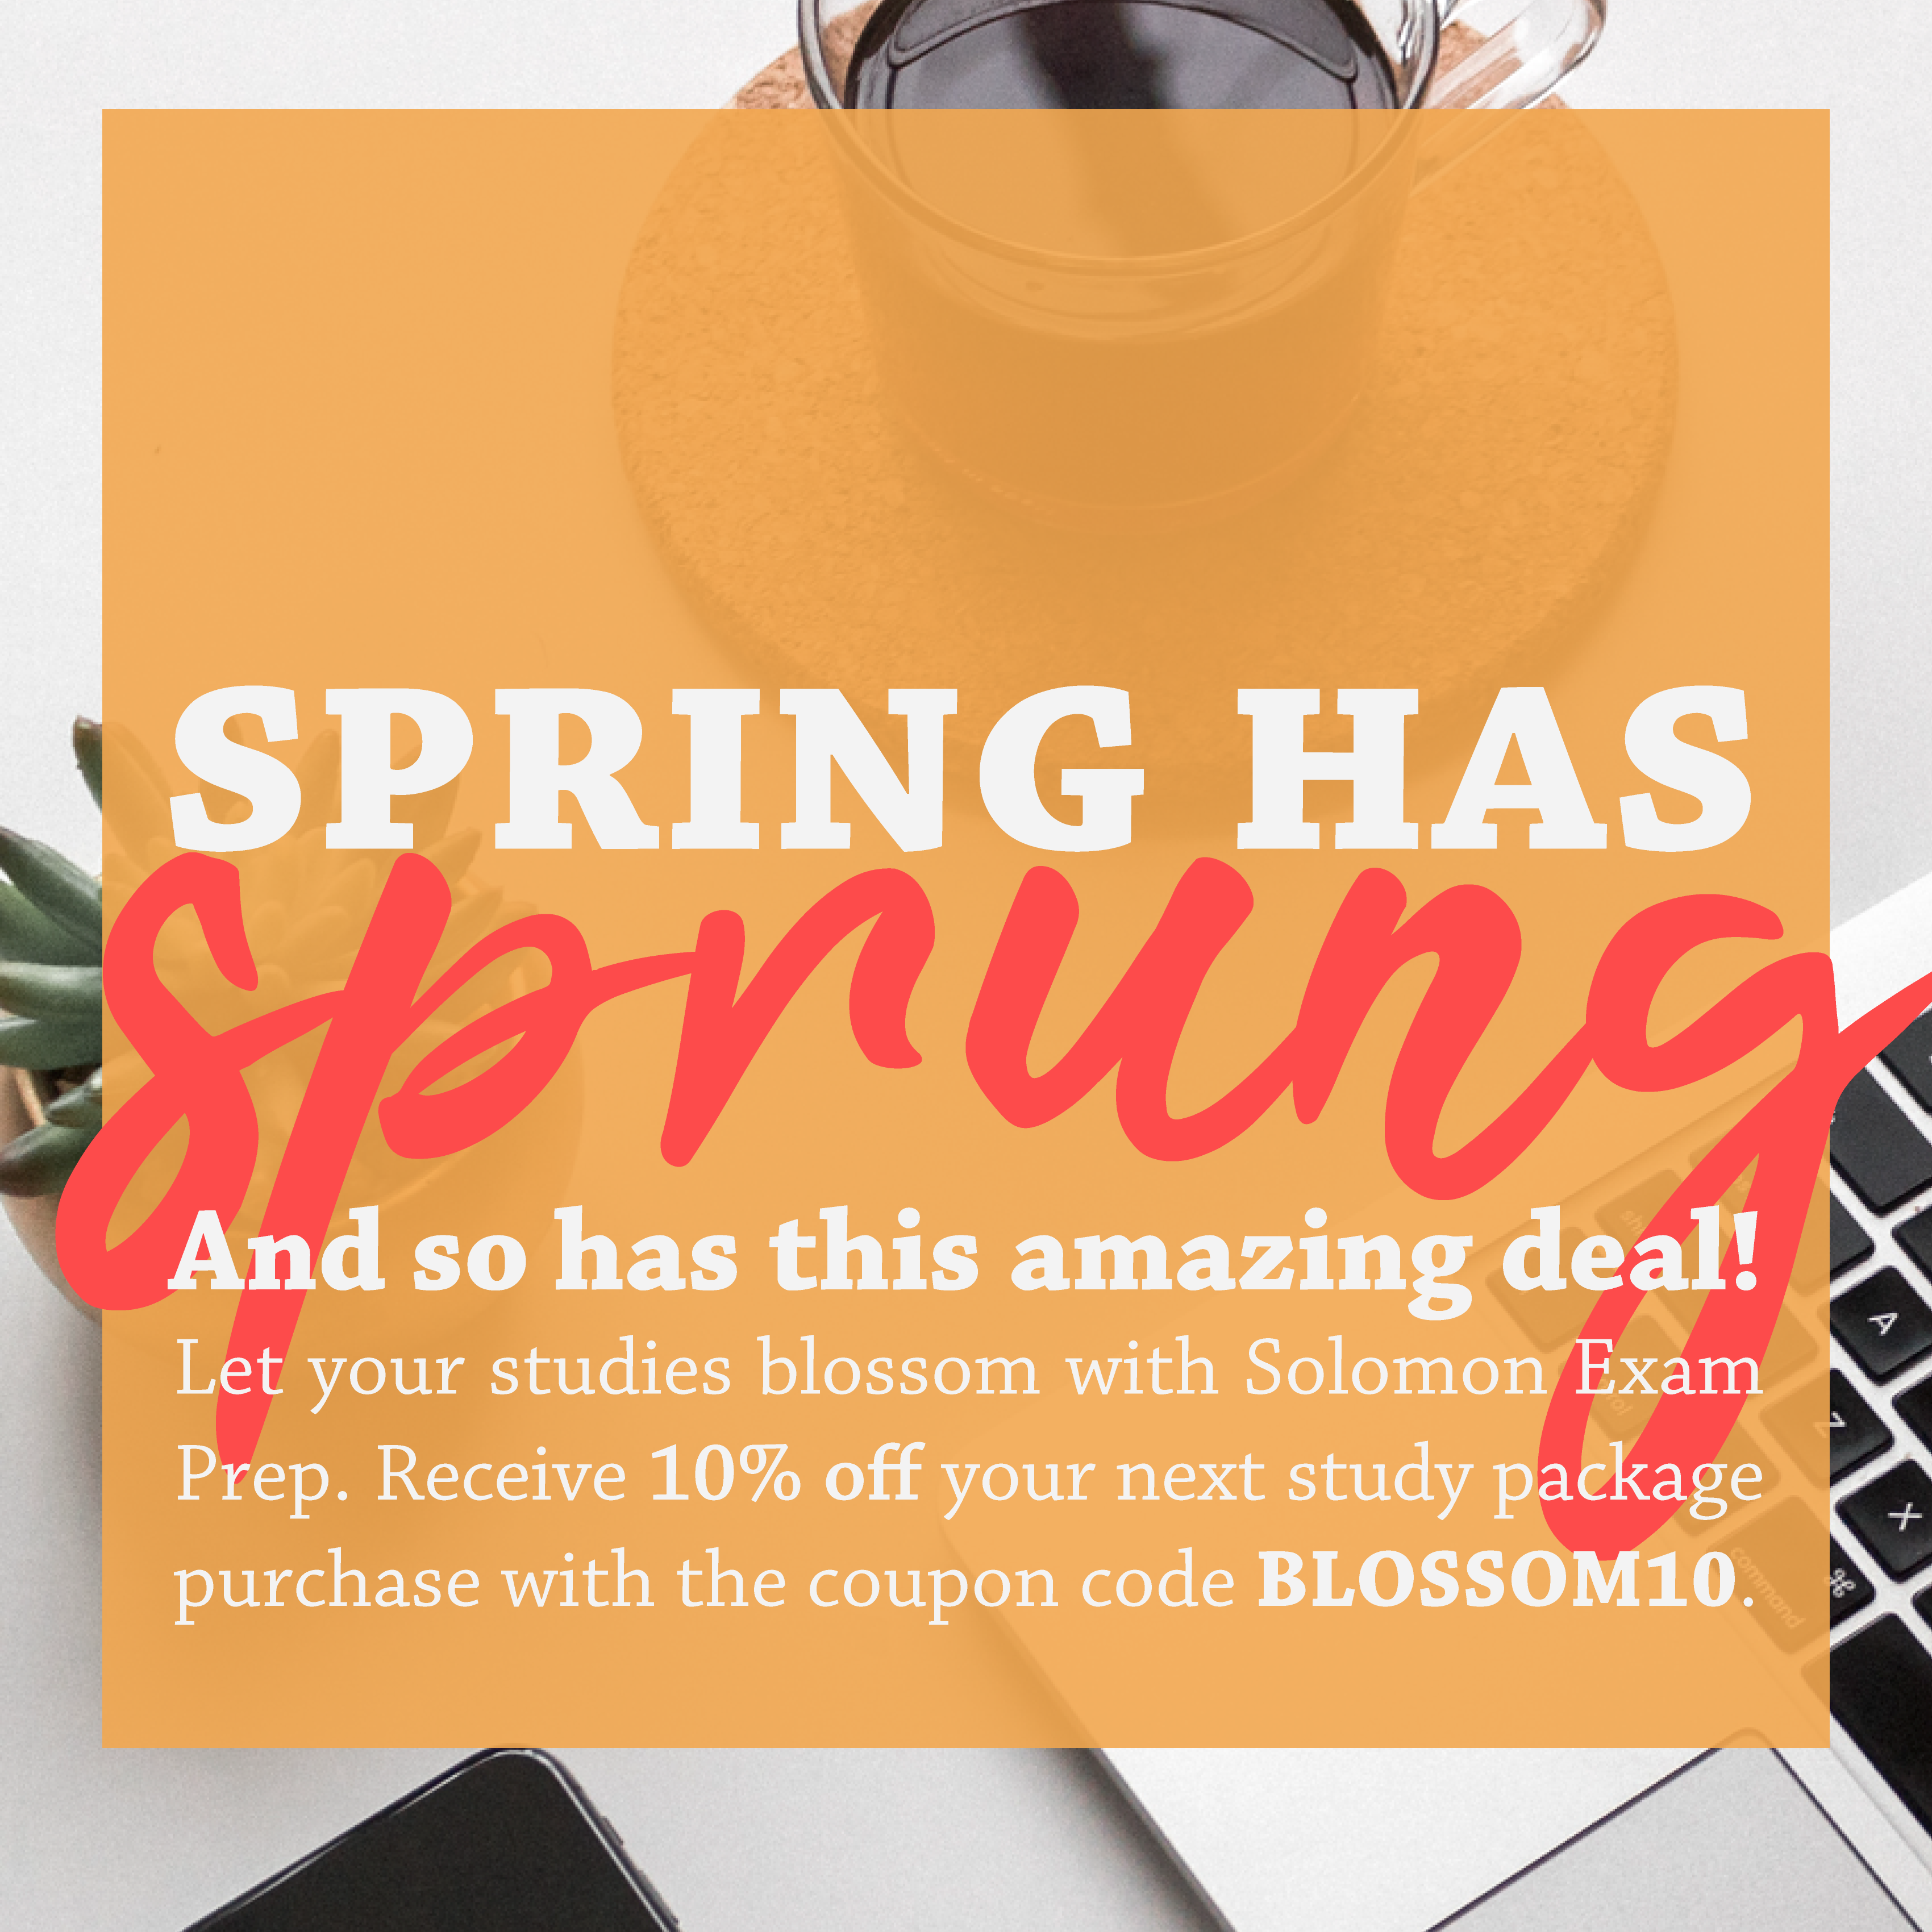 Spring has sprung and so has this amazing deal! Let your studies blossom with Solomon Exam Prep. Receive 10% off your next study package purchase with the coupon code BLOSSOM10.